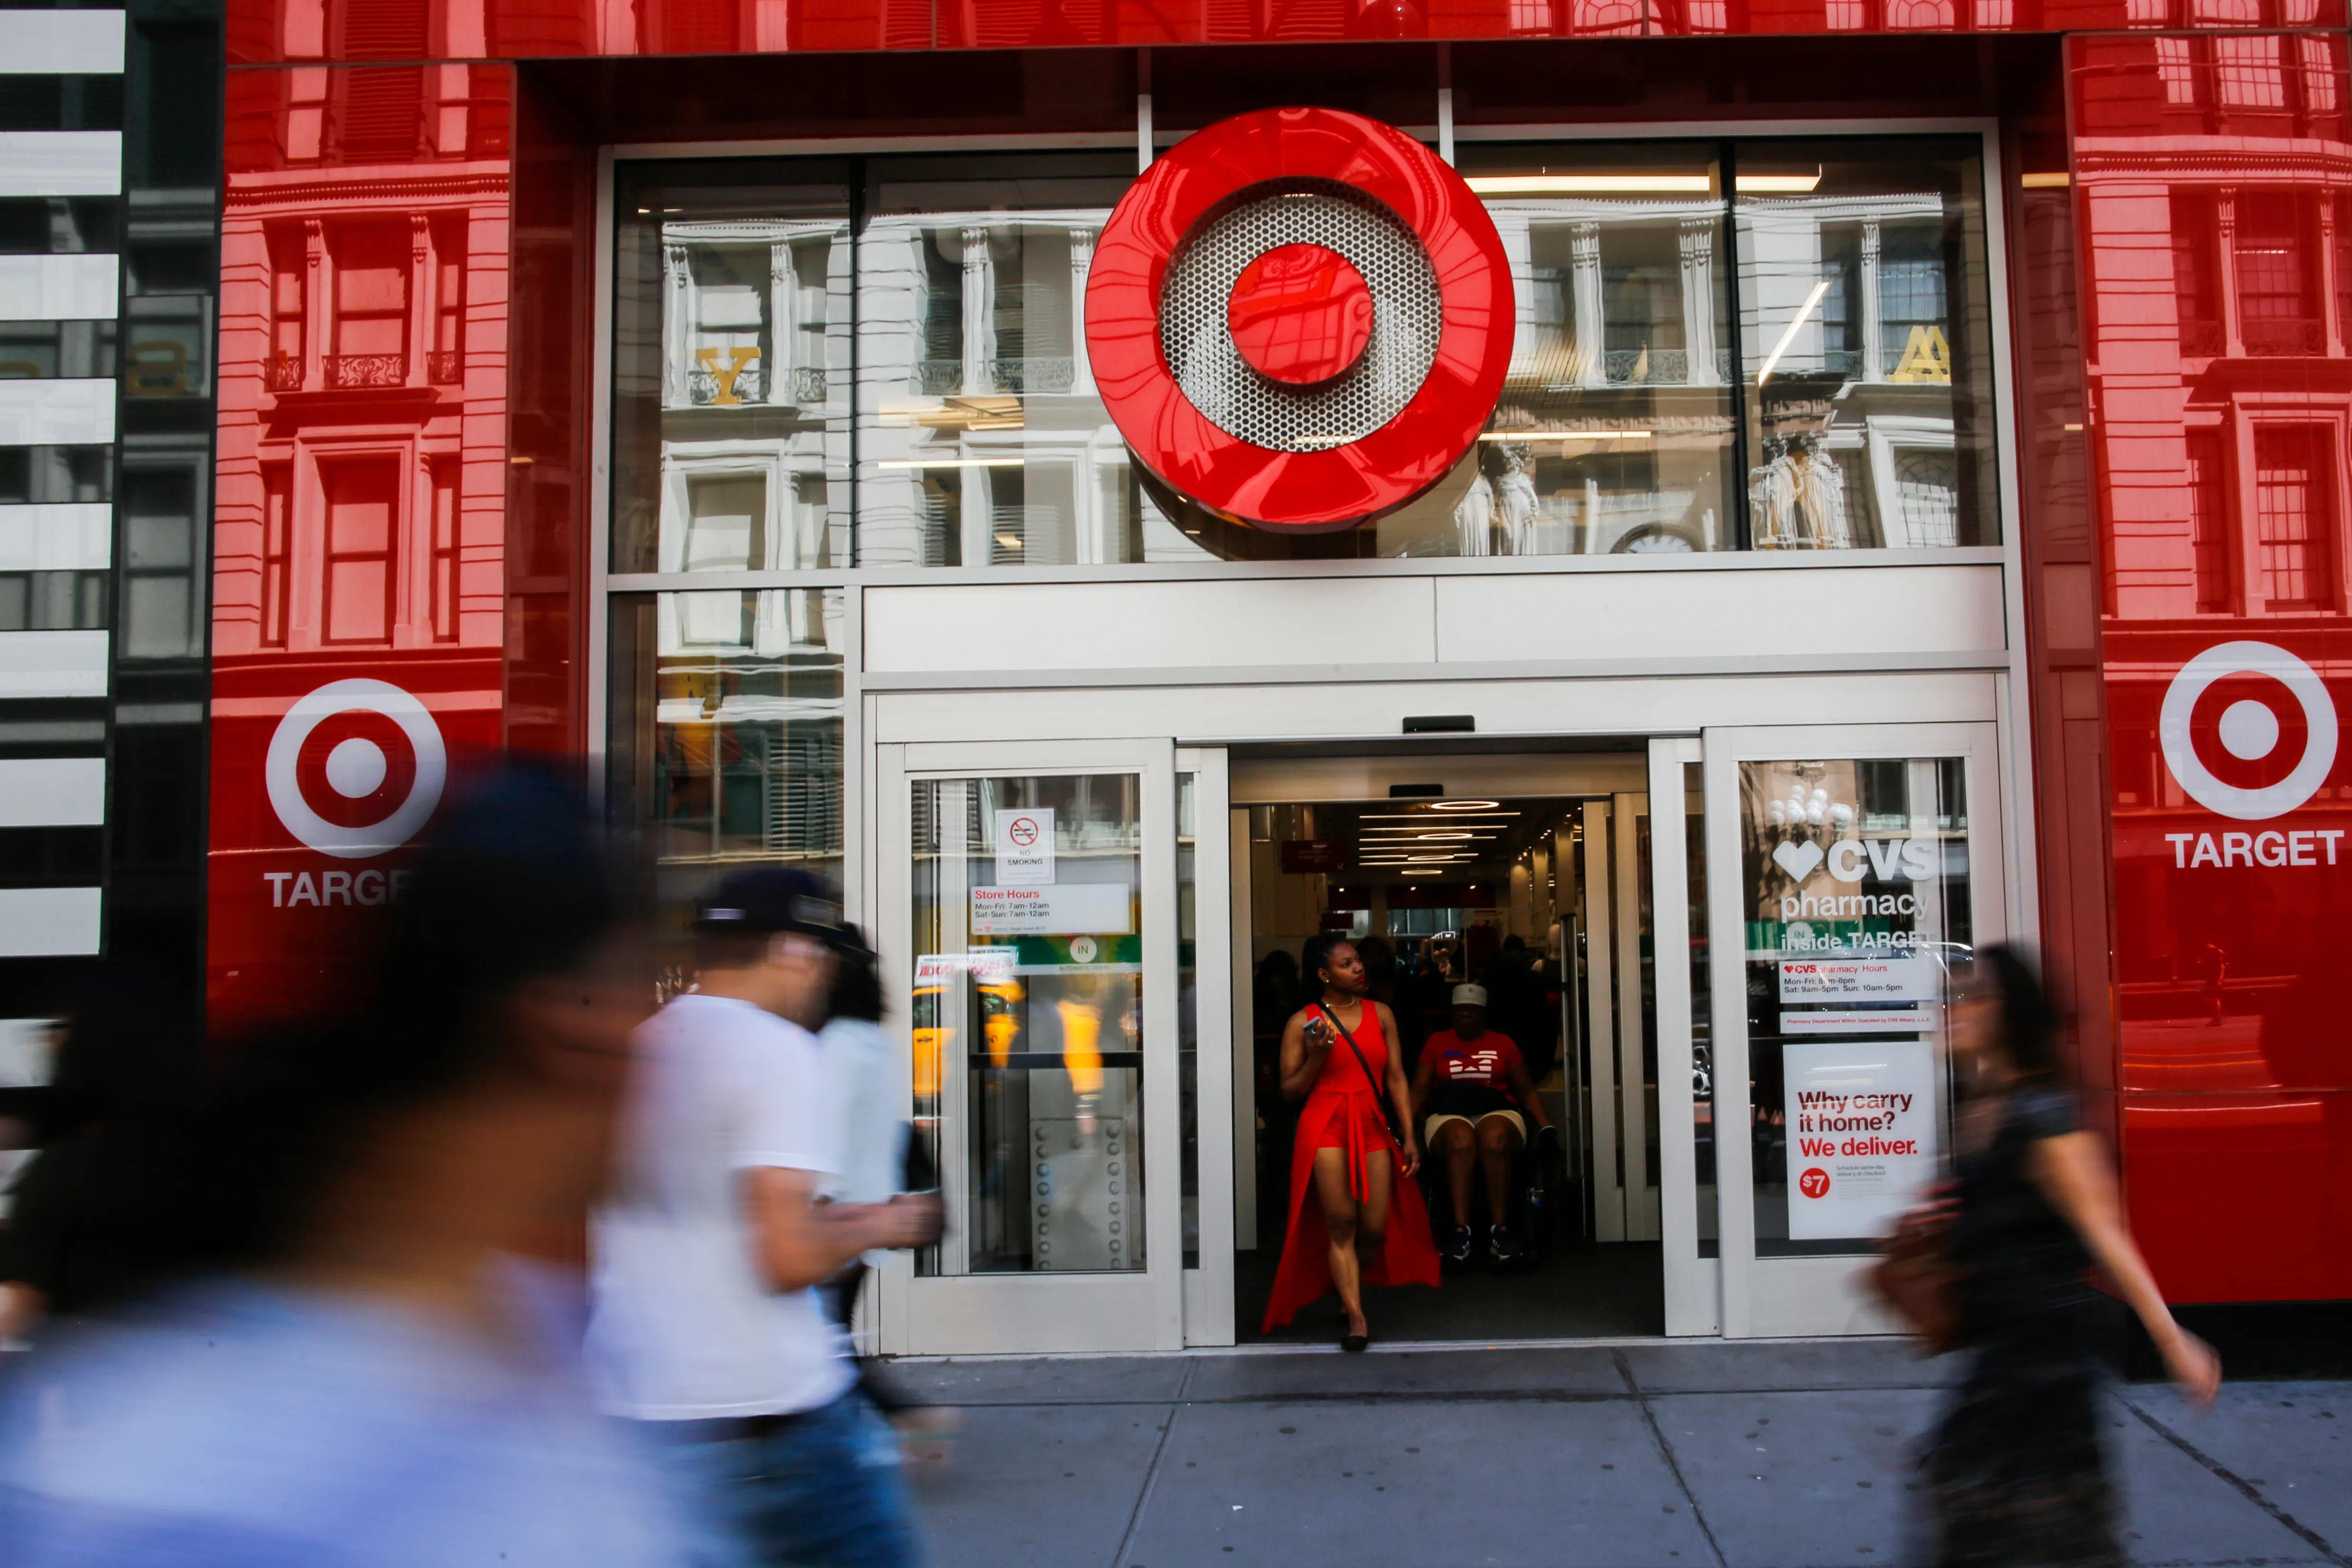 You Can Get at Least 15% Off Pretty Much Everything During Target’s Cyber Monday Sale